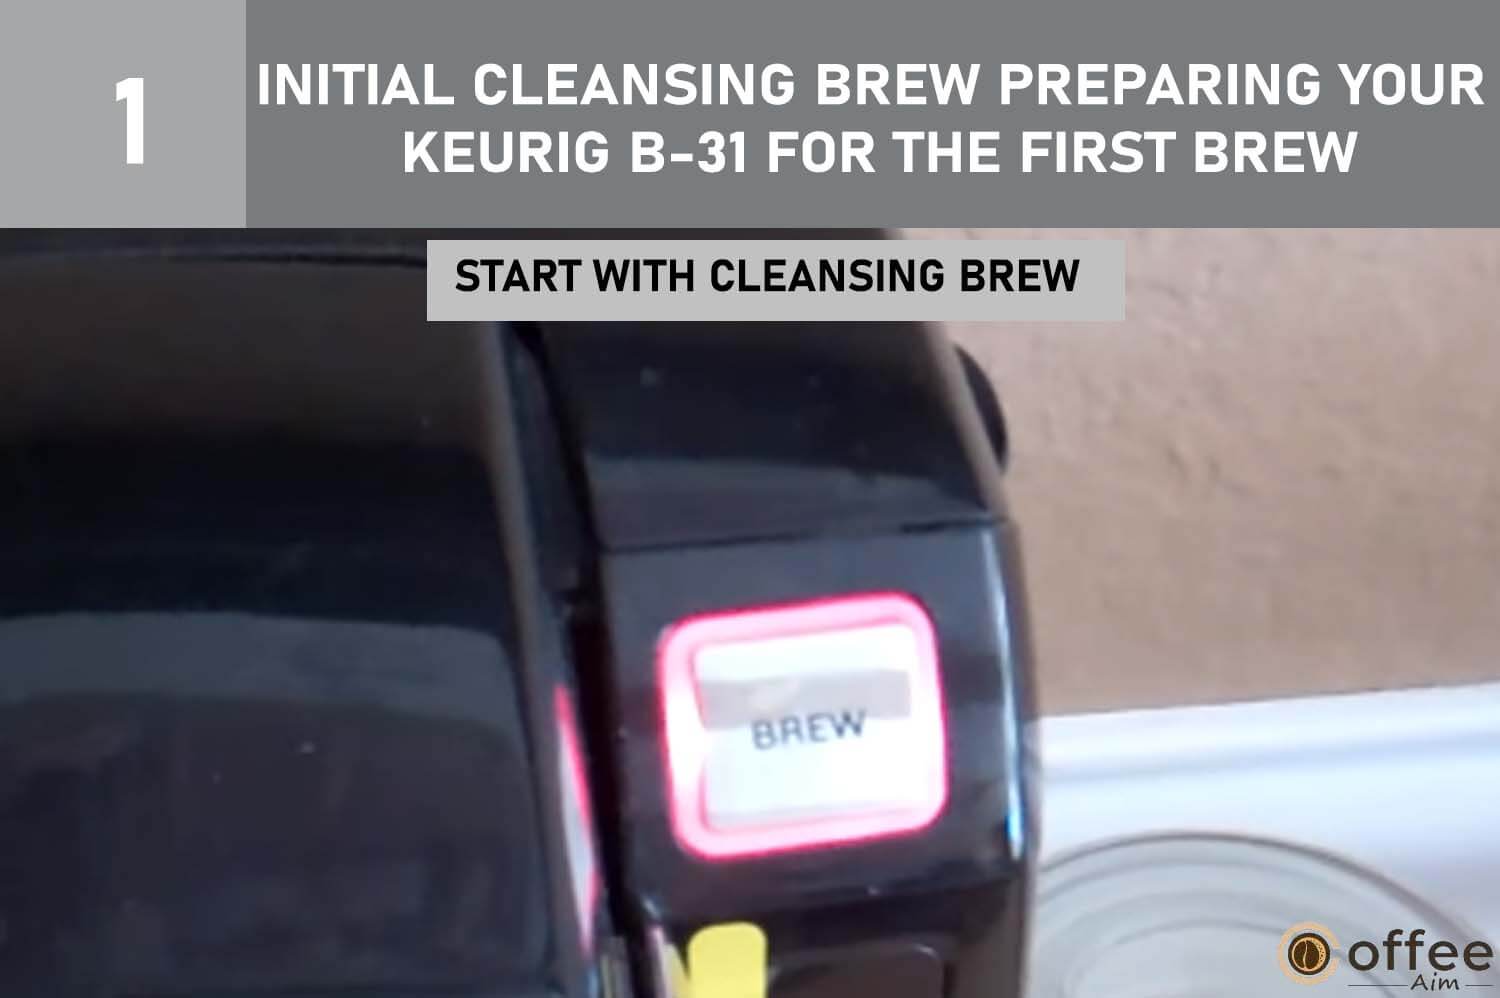 This illustration illustrates the 'start with cleansing brew' step as part of the process for preparing your Keurig B-31 for its initial brew, as outlined in the article 'How To Use Keurig B-31'